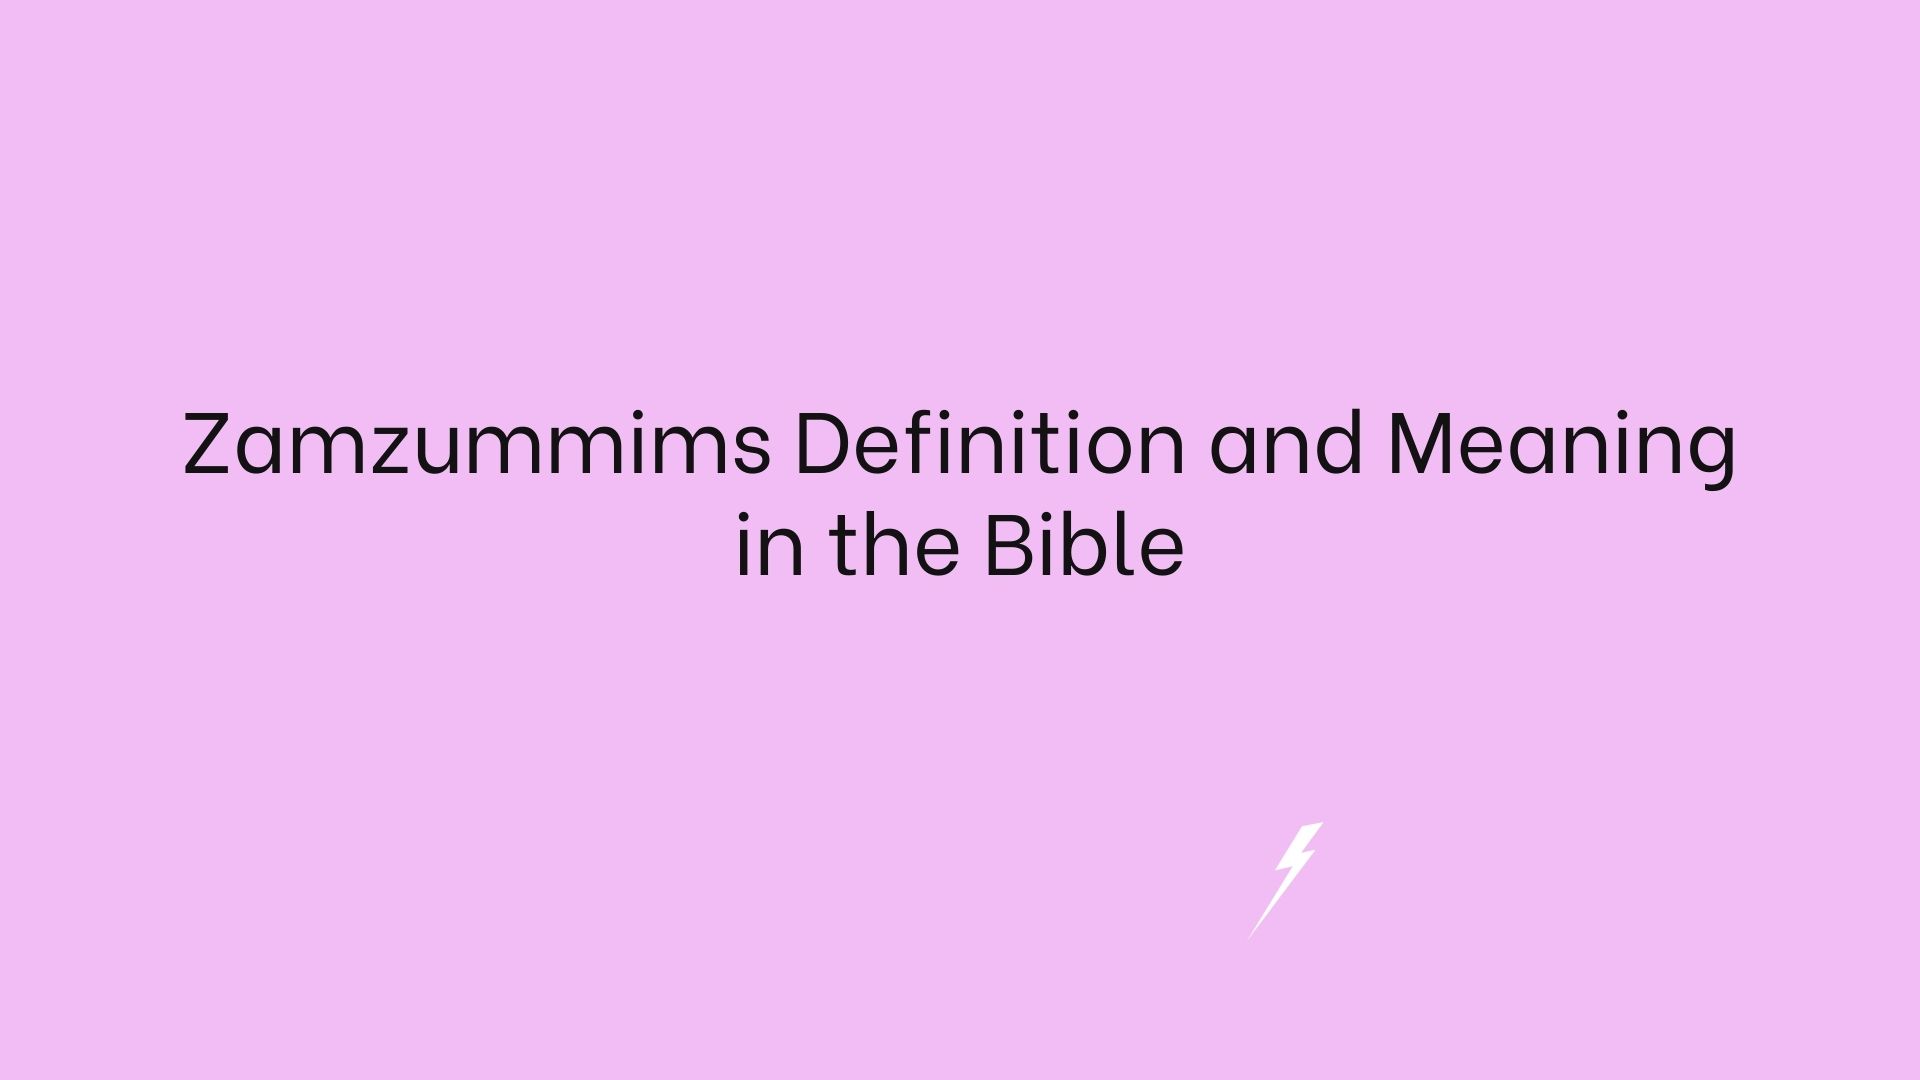 Zamzummims Definition and Meaning in the Bible